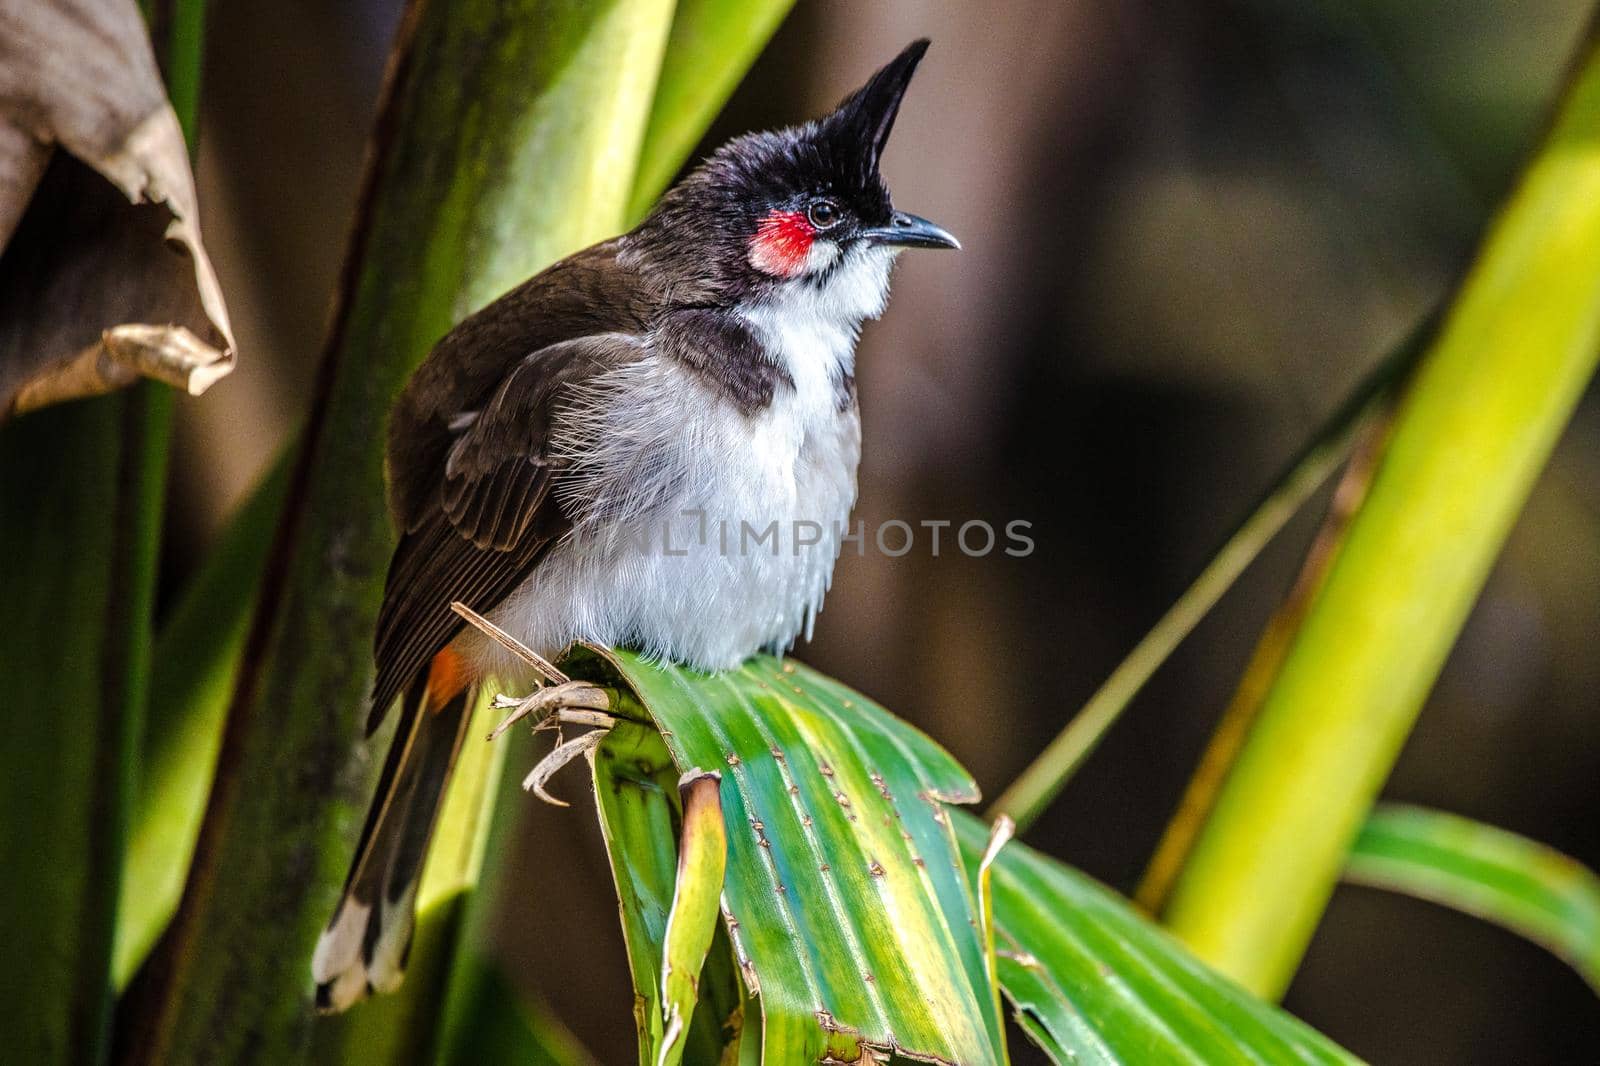 Southeast Asian Red-whiskered bulbul (Pycnonotus jocosus), Mauritius, Africa by Weltblick